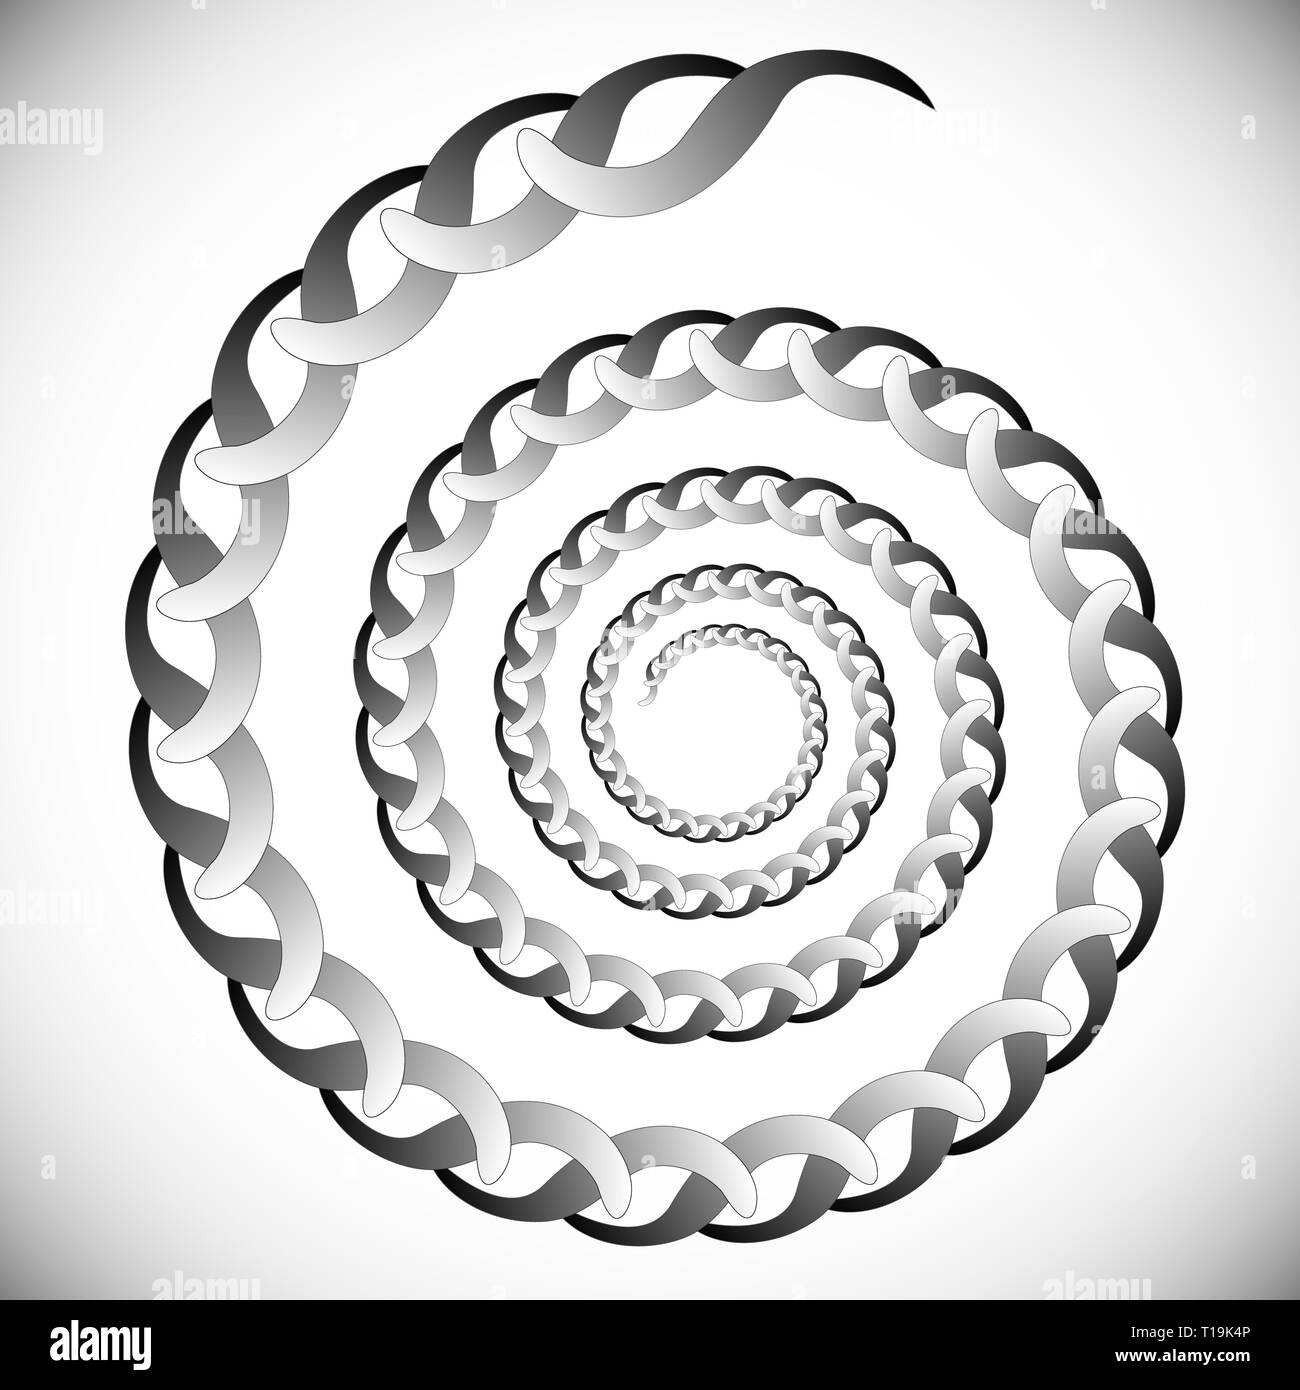 Abstract spinning, twirling graphics with rotating shapes. Spiraling ...